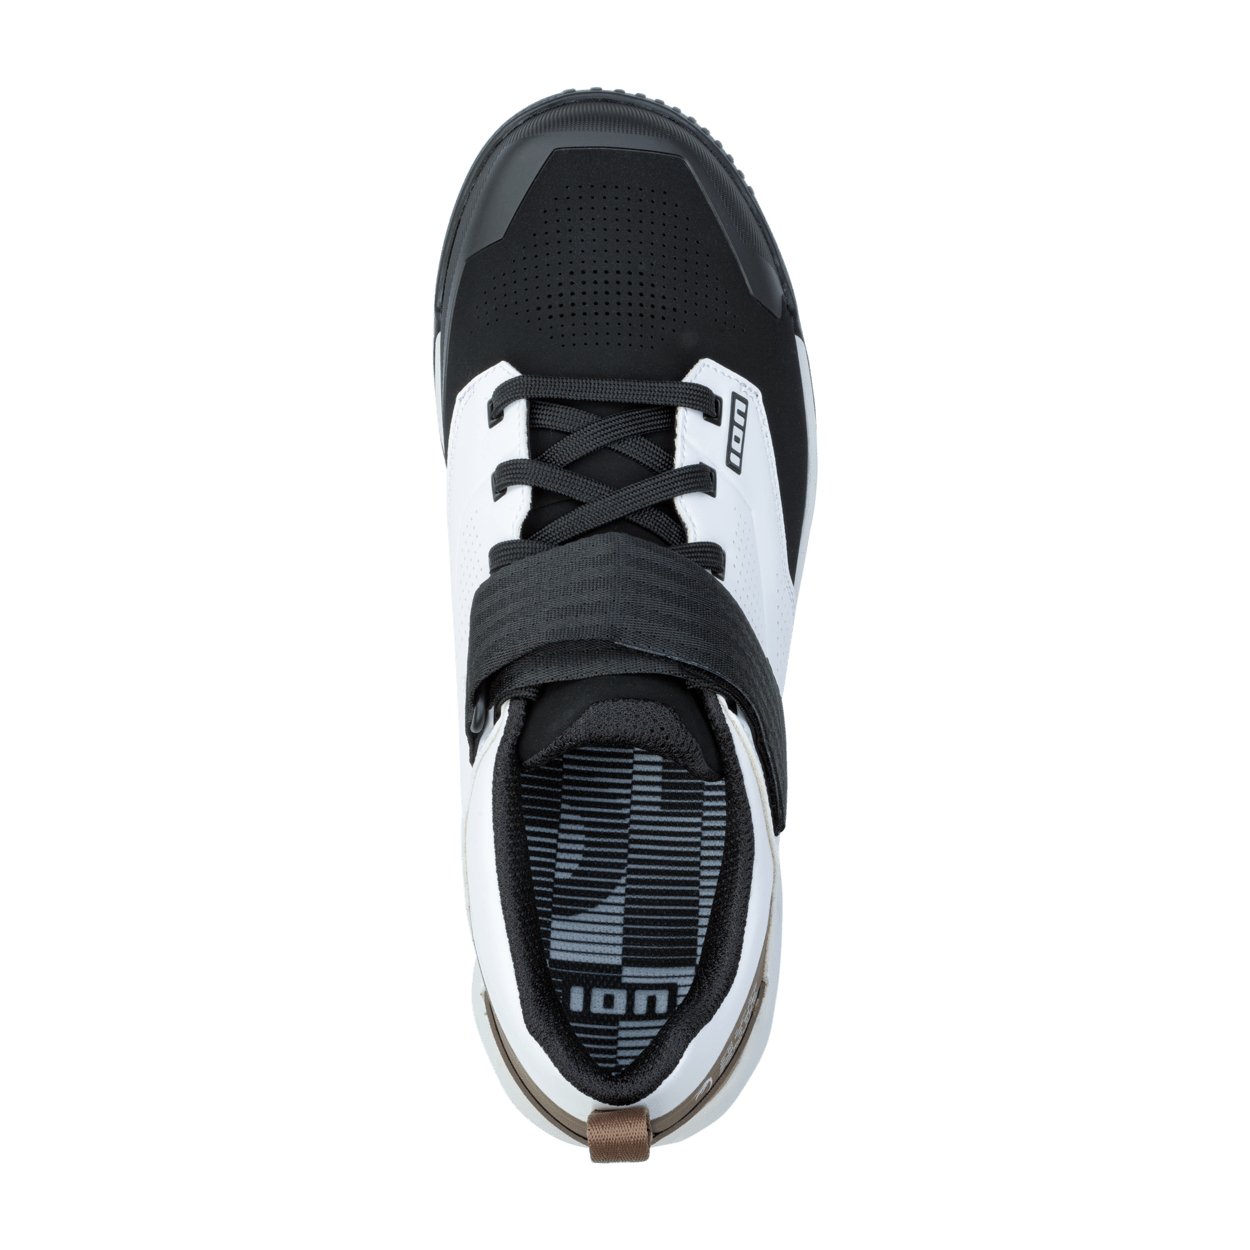 ION MTB Clipless Shoes Rascal Amp 2023 - Worthing Watersports - 9008415966752 - Footwear - ION Bike